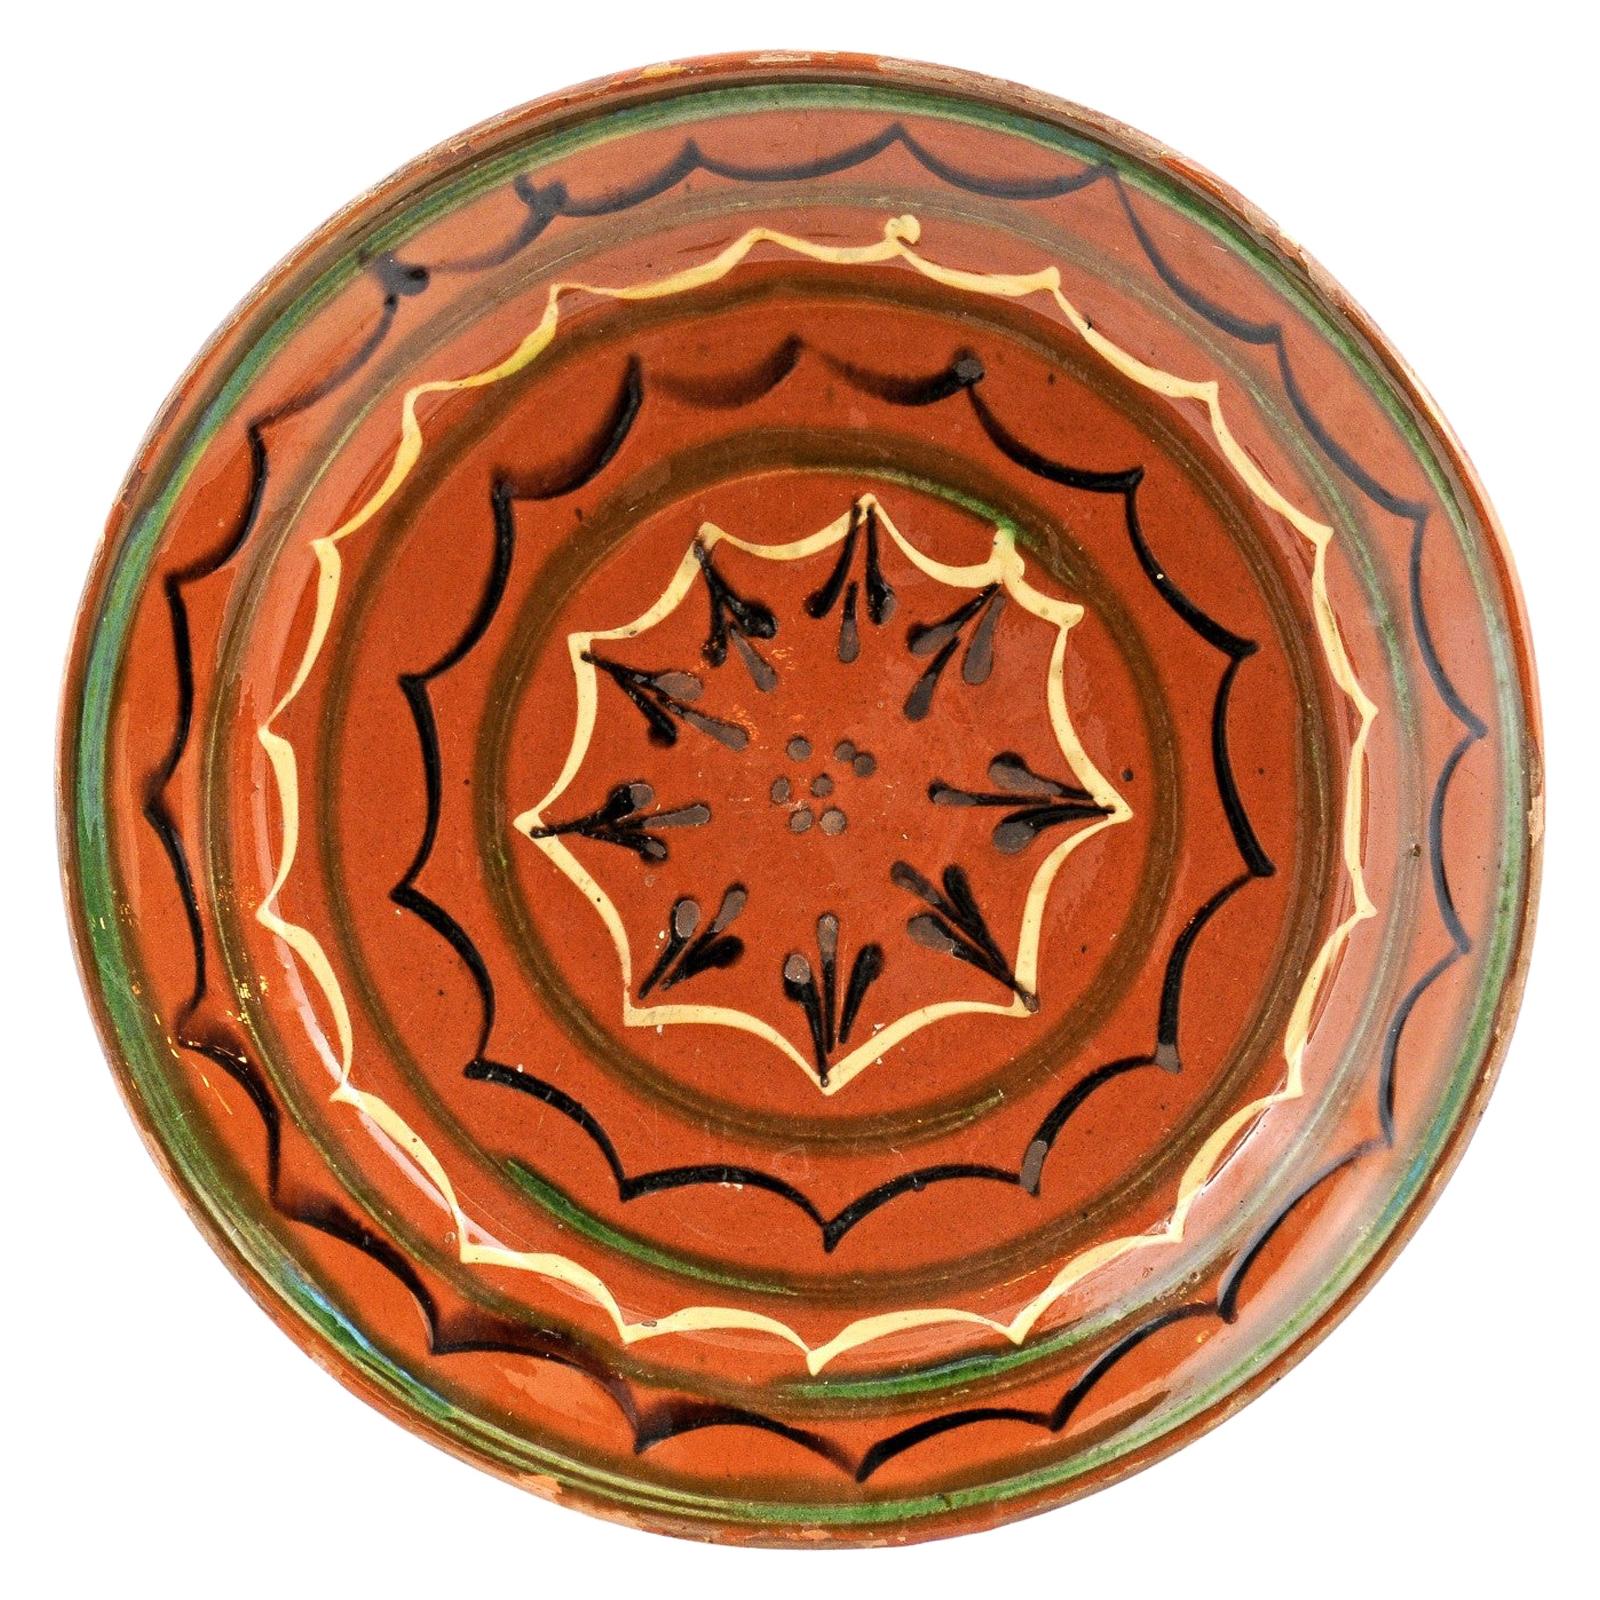 French 19th Century Pottery Plate with Rust Glaze, Black, Green and Cream Motifs